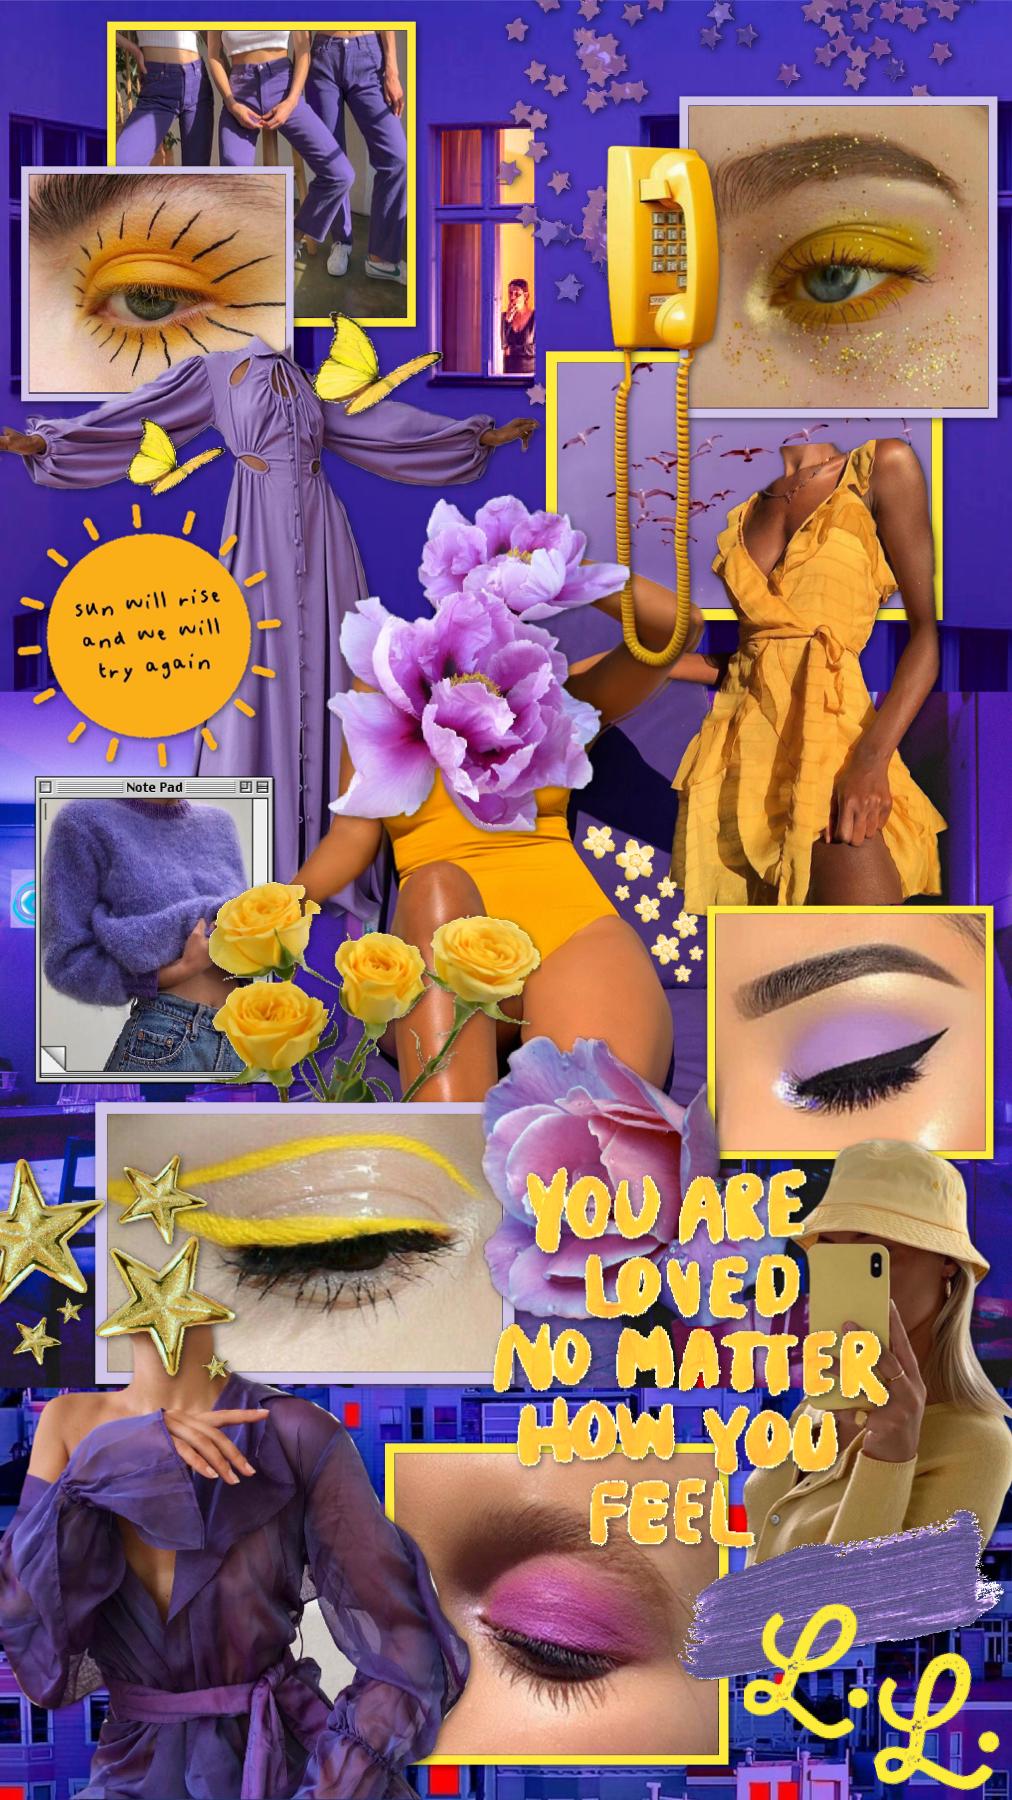 i started working on this collage a week ago, and i finally had the time to finish today!💜 hope u like it🌙